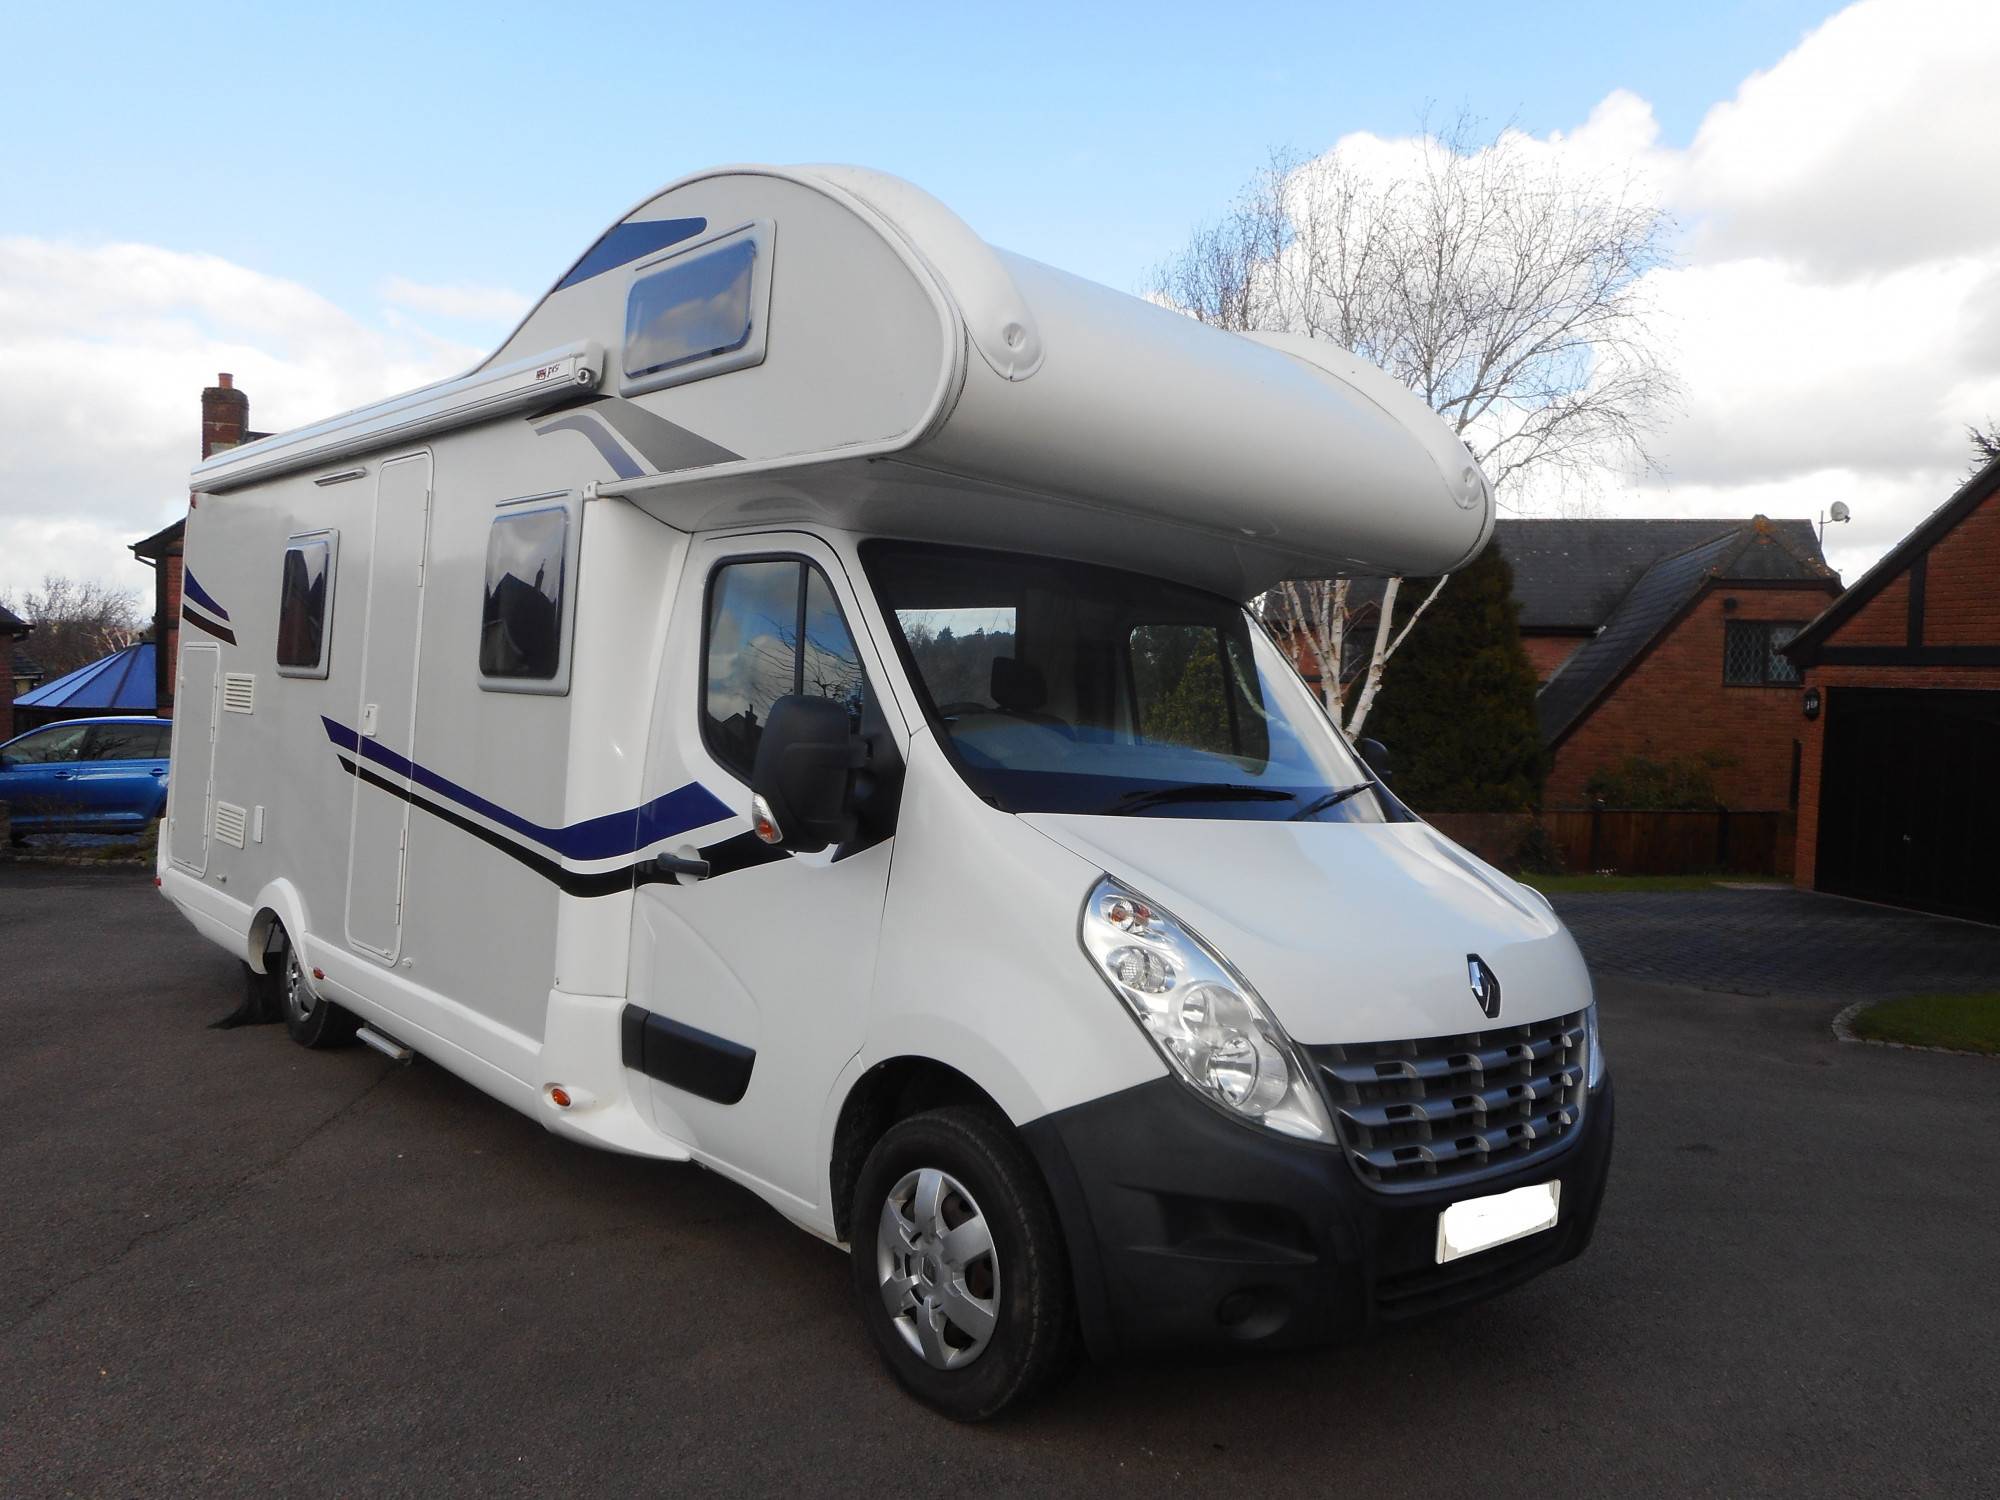 A Rimor Motorhome called Katamarano and for hire in High Wycombe, England